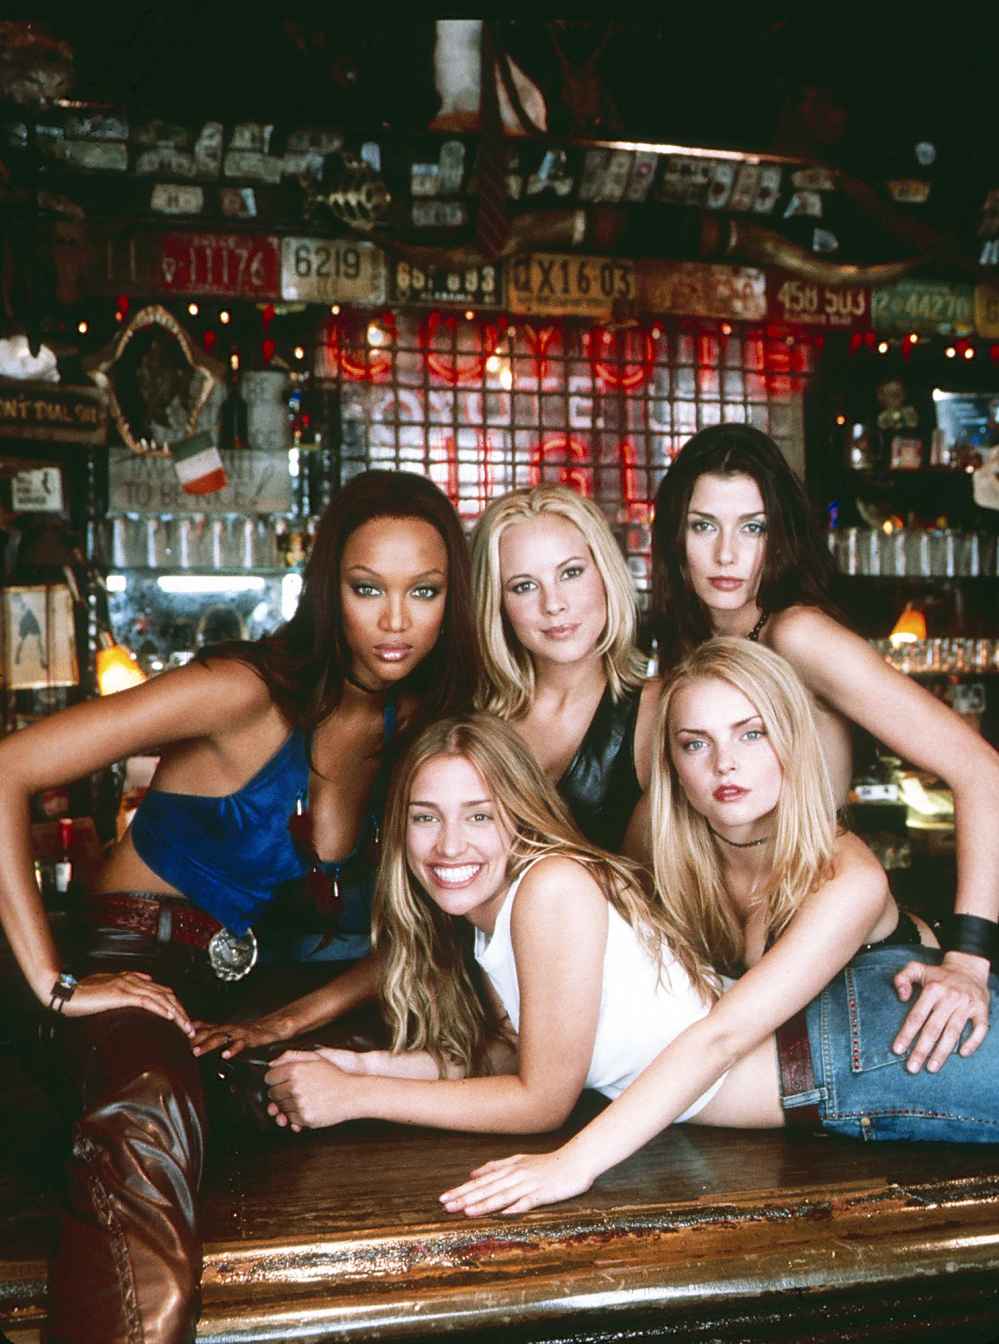 Tyra Banks, Piper Perabo Maria Bello Izabella Miko and Bridget Moynahan in Coyote Ugly Tyra Banks Confirms a Coyote Ugly Reboot Is Happening